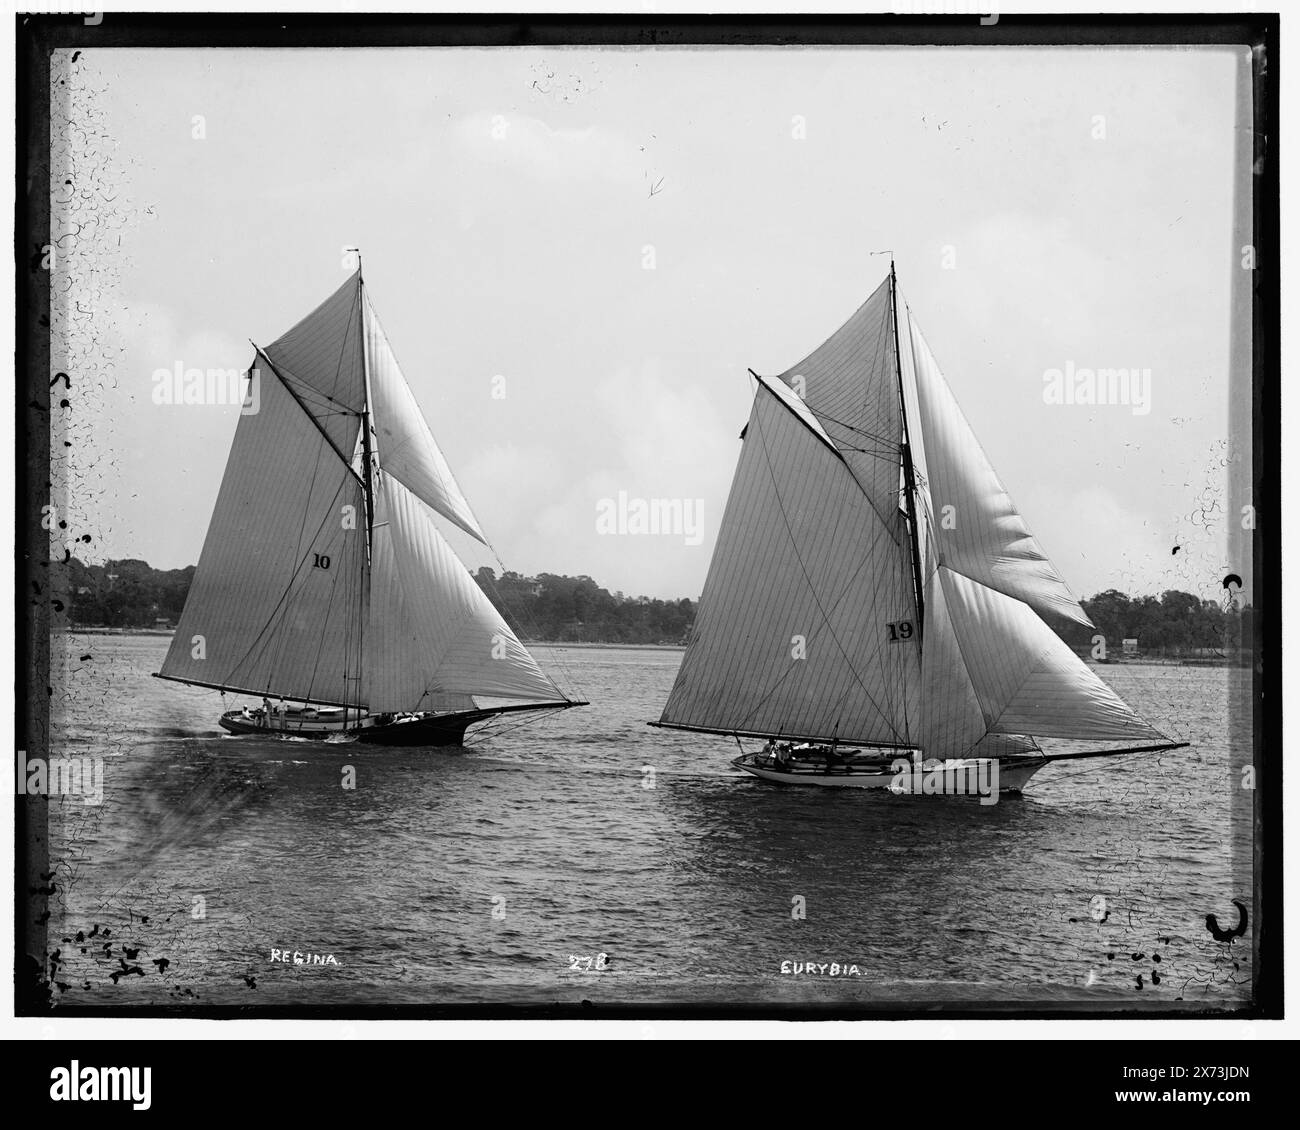 Regina and Eurybia, Attribution based on style of title and numbering., '278' on negative., No Detroit Publishing Co. no., Gift; State Historical Society of Colorado; 1949,  Regina (Yacht) , Eurybia (Yacht) , Yachts. Stock Photo